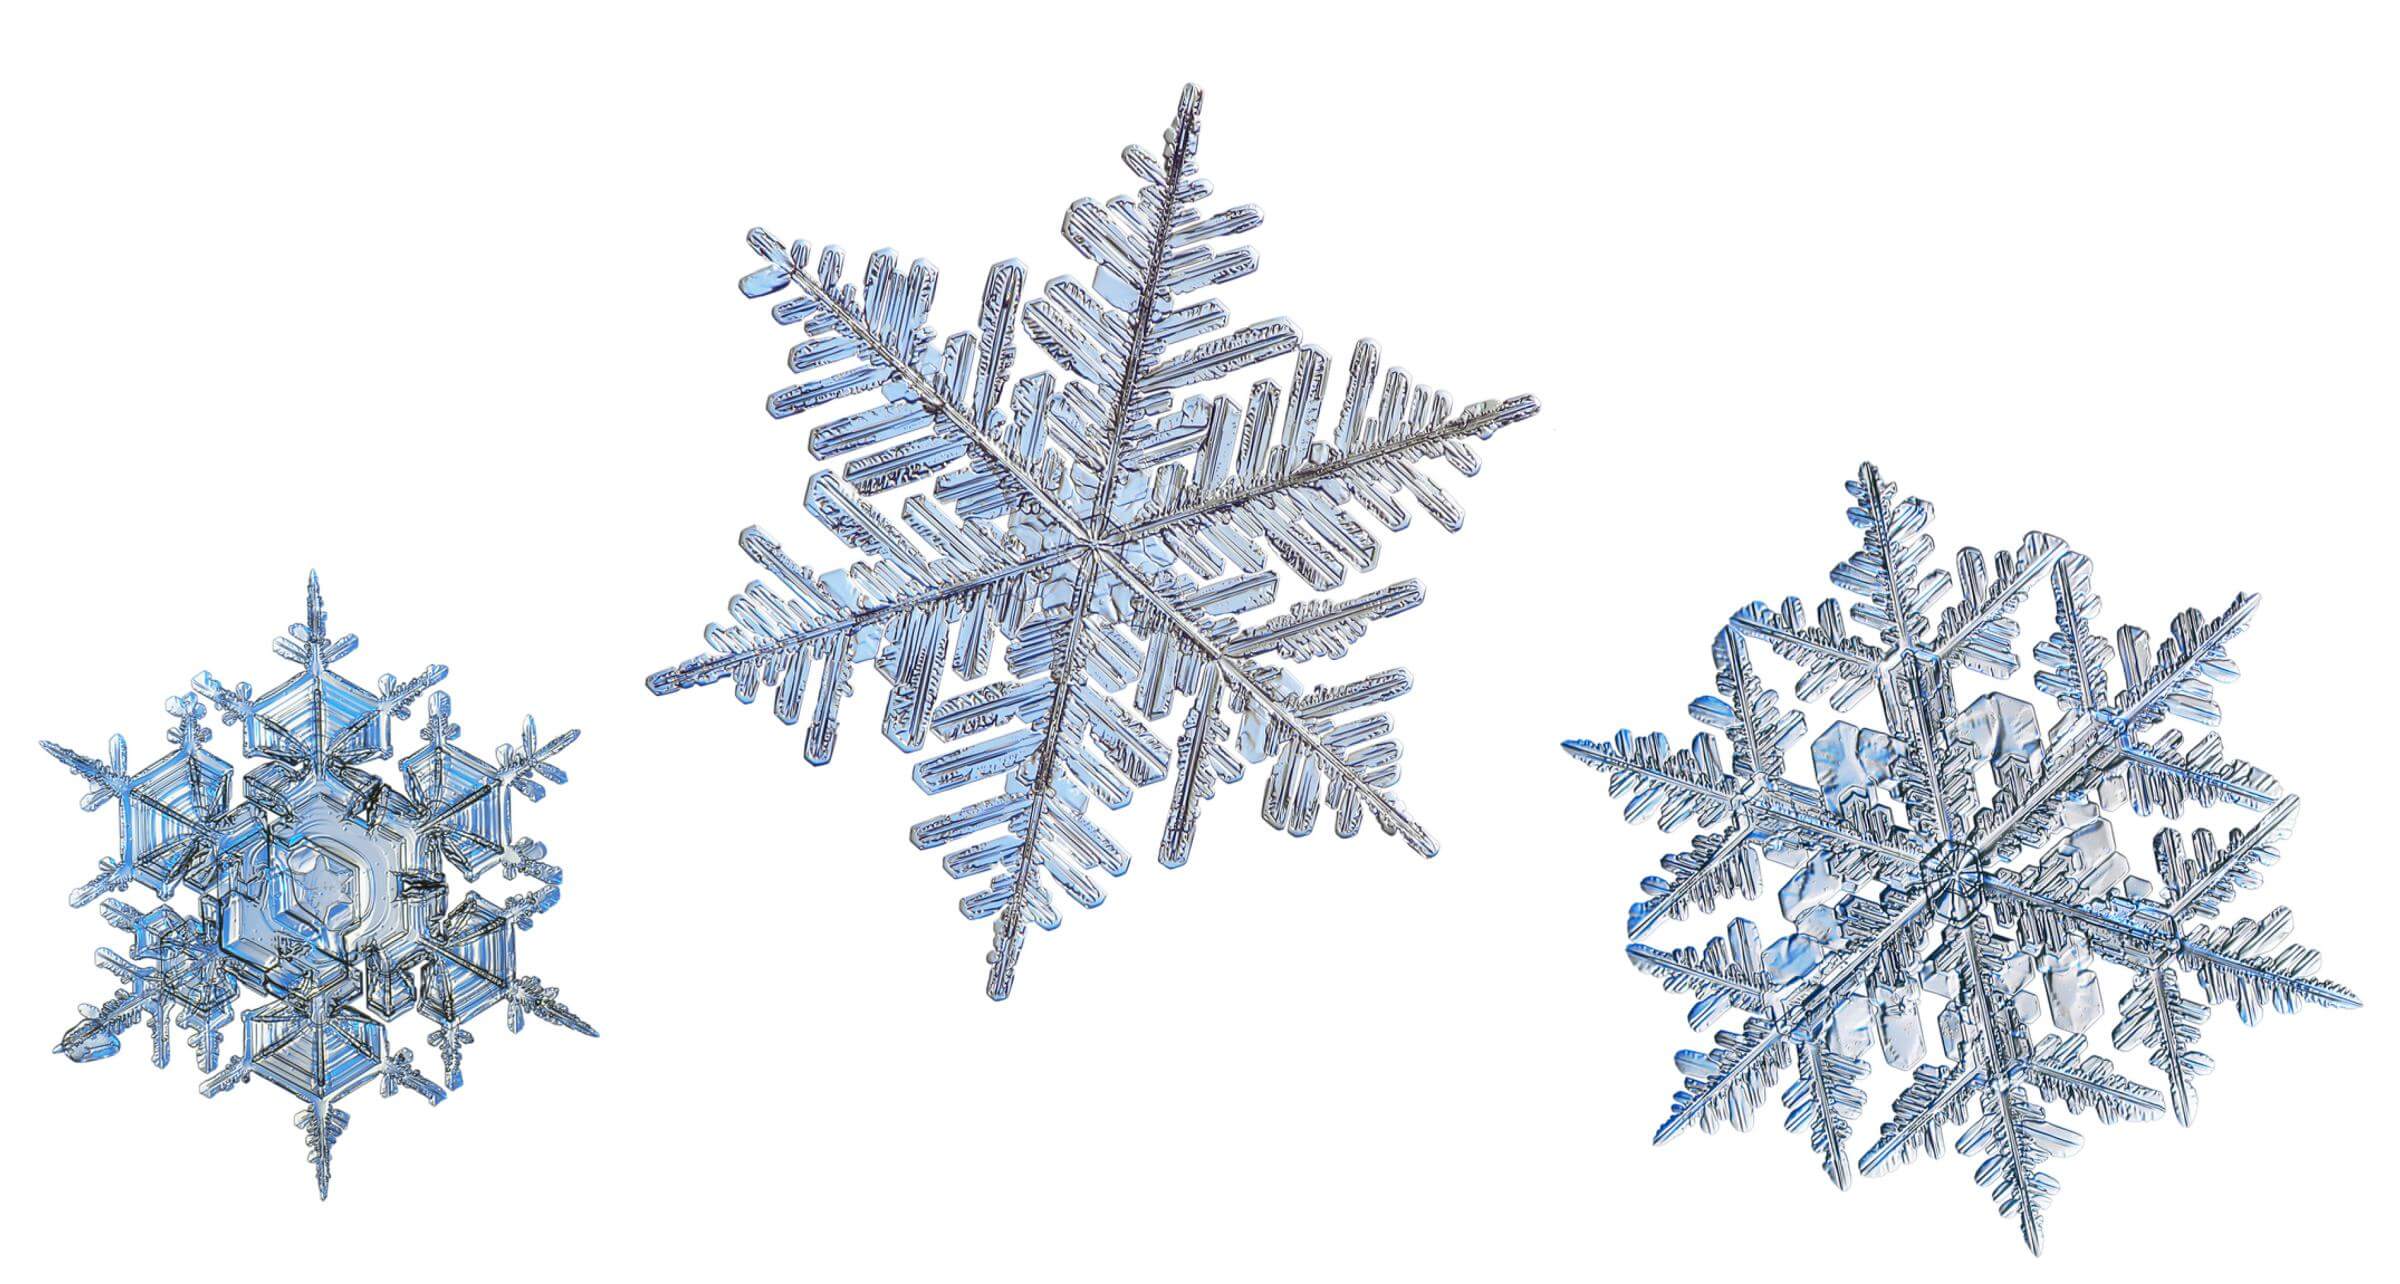 Did you know: Interesting facts about snowflakes, The Learning Key